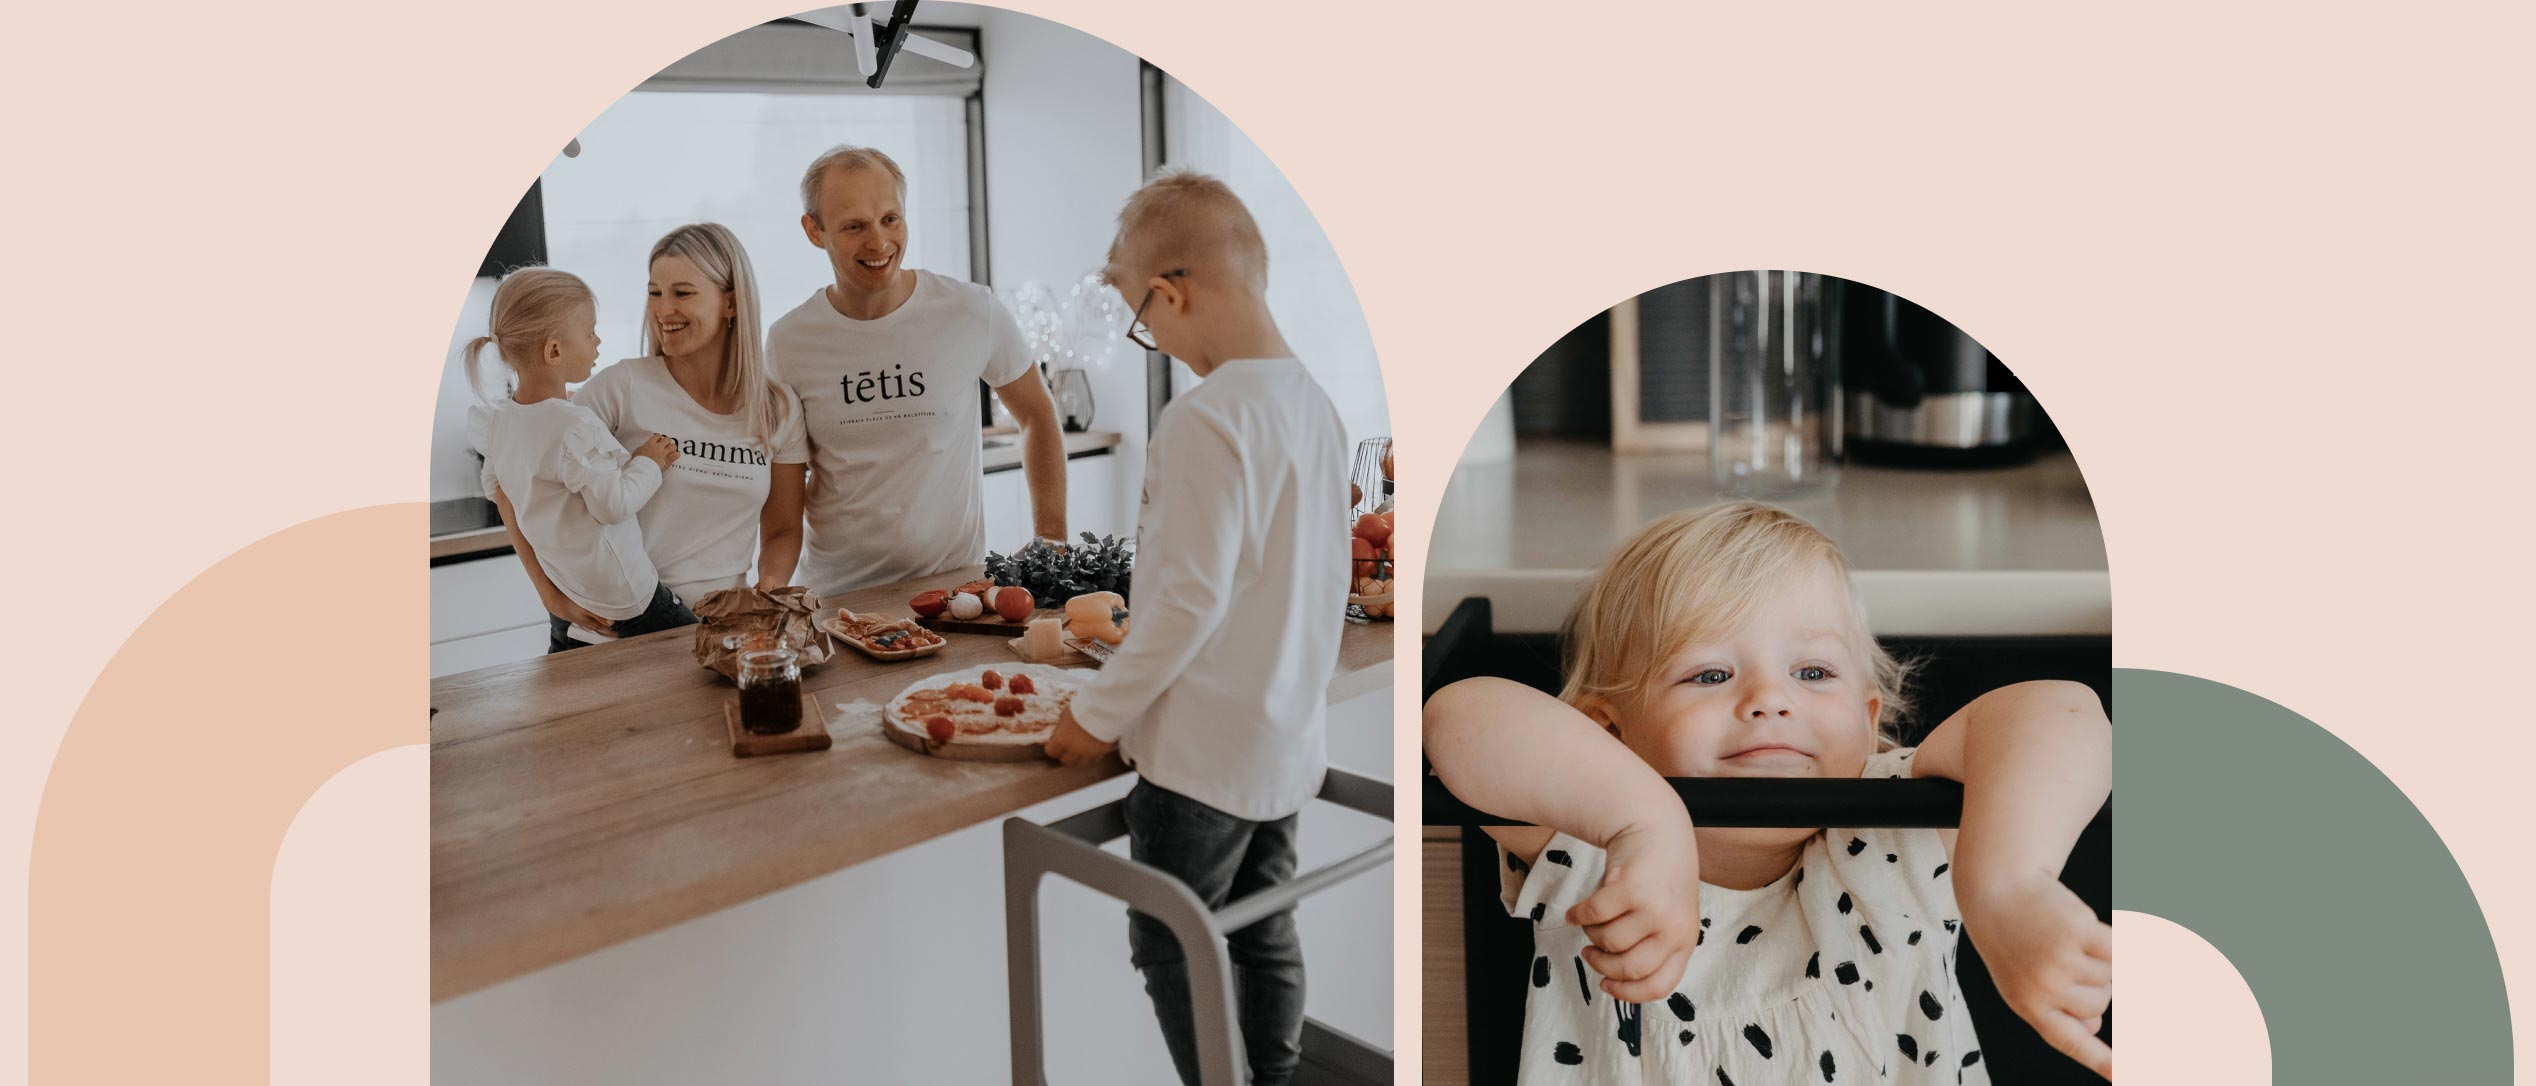 A photo of a family in a kitchen with a baby in a high chair.